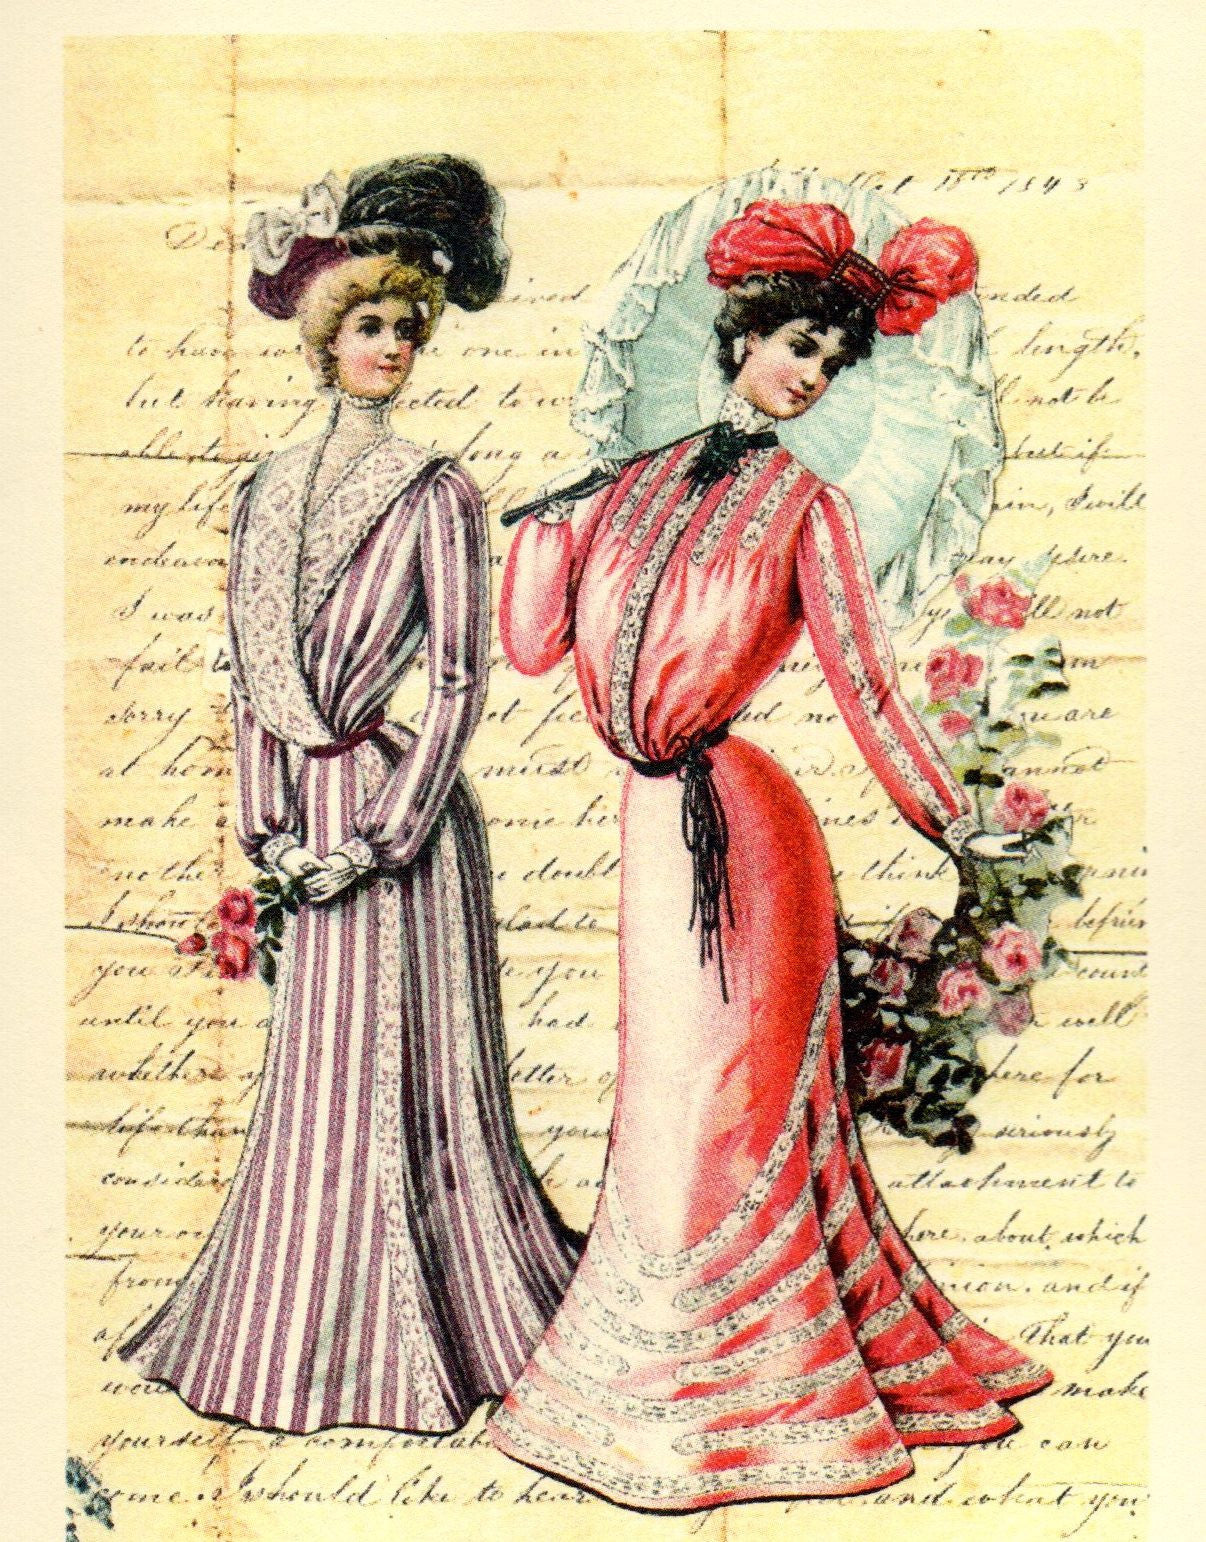 1901 Women's Fashions & Roses Note Card – The Marble Faun Books & Gifts